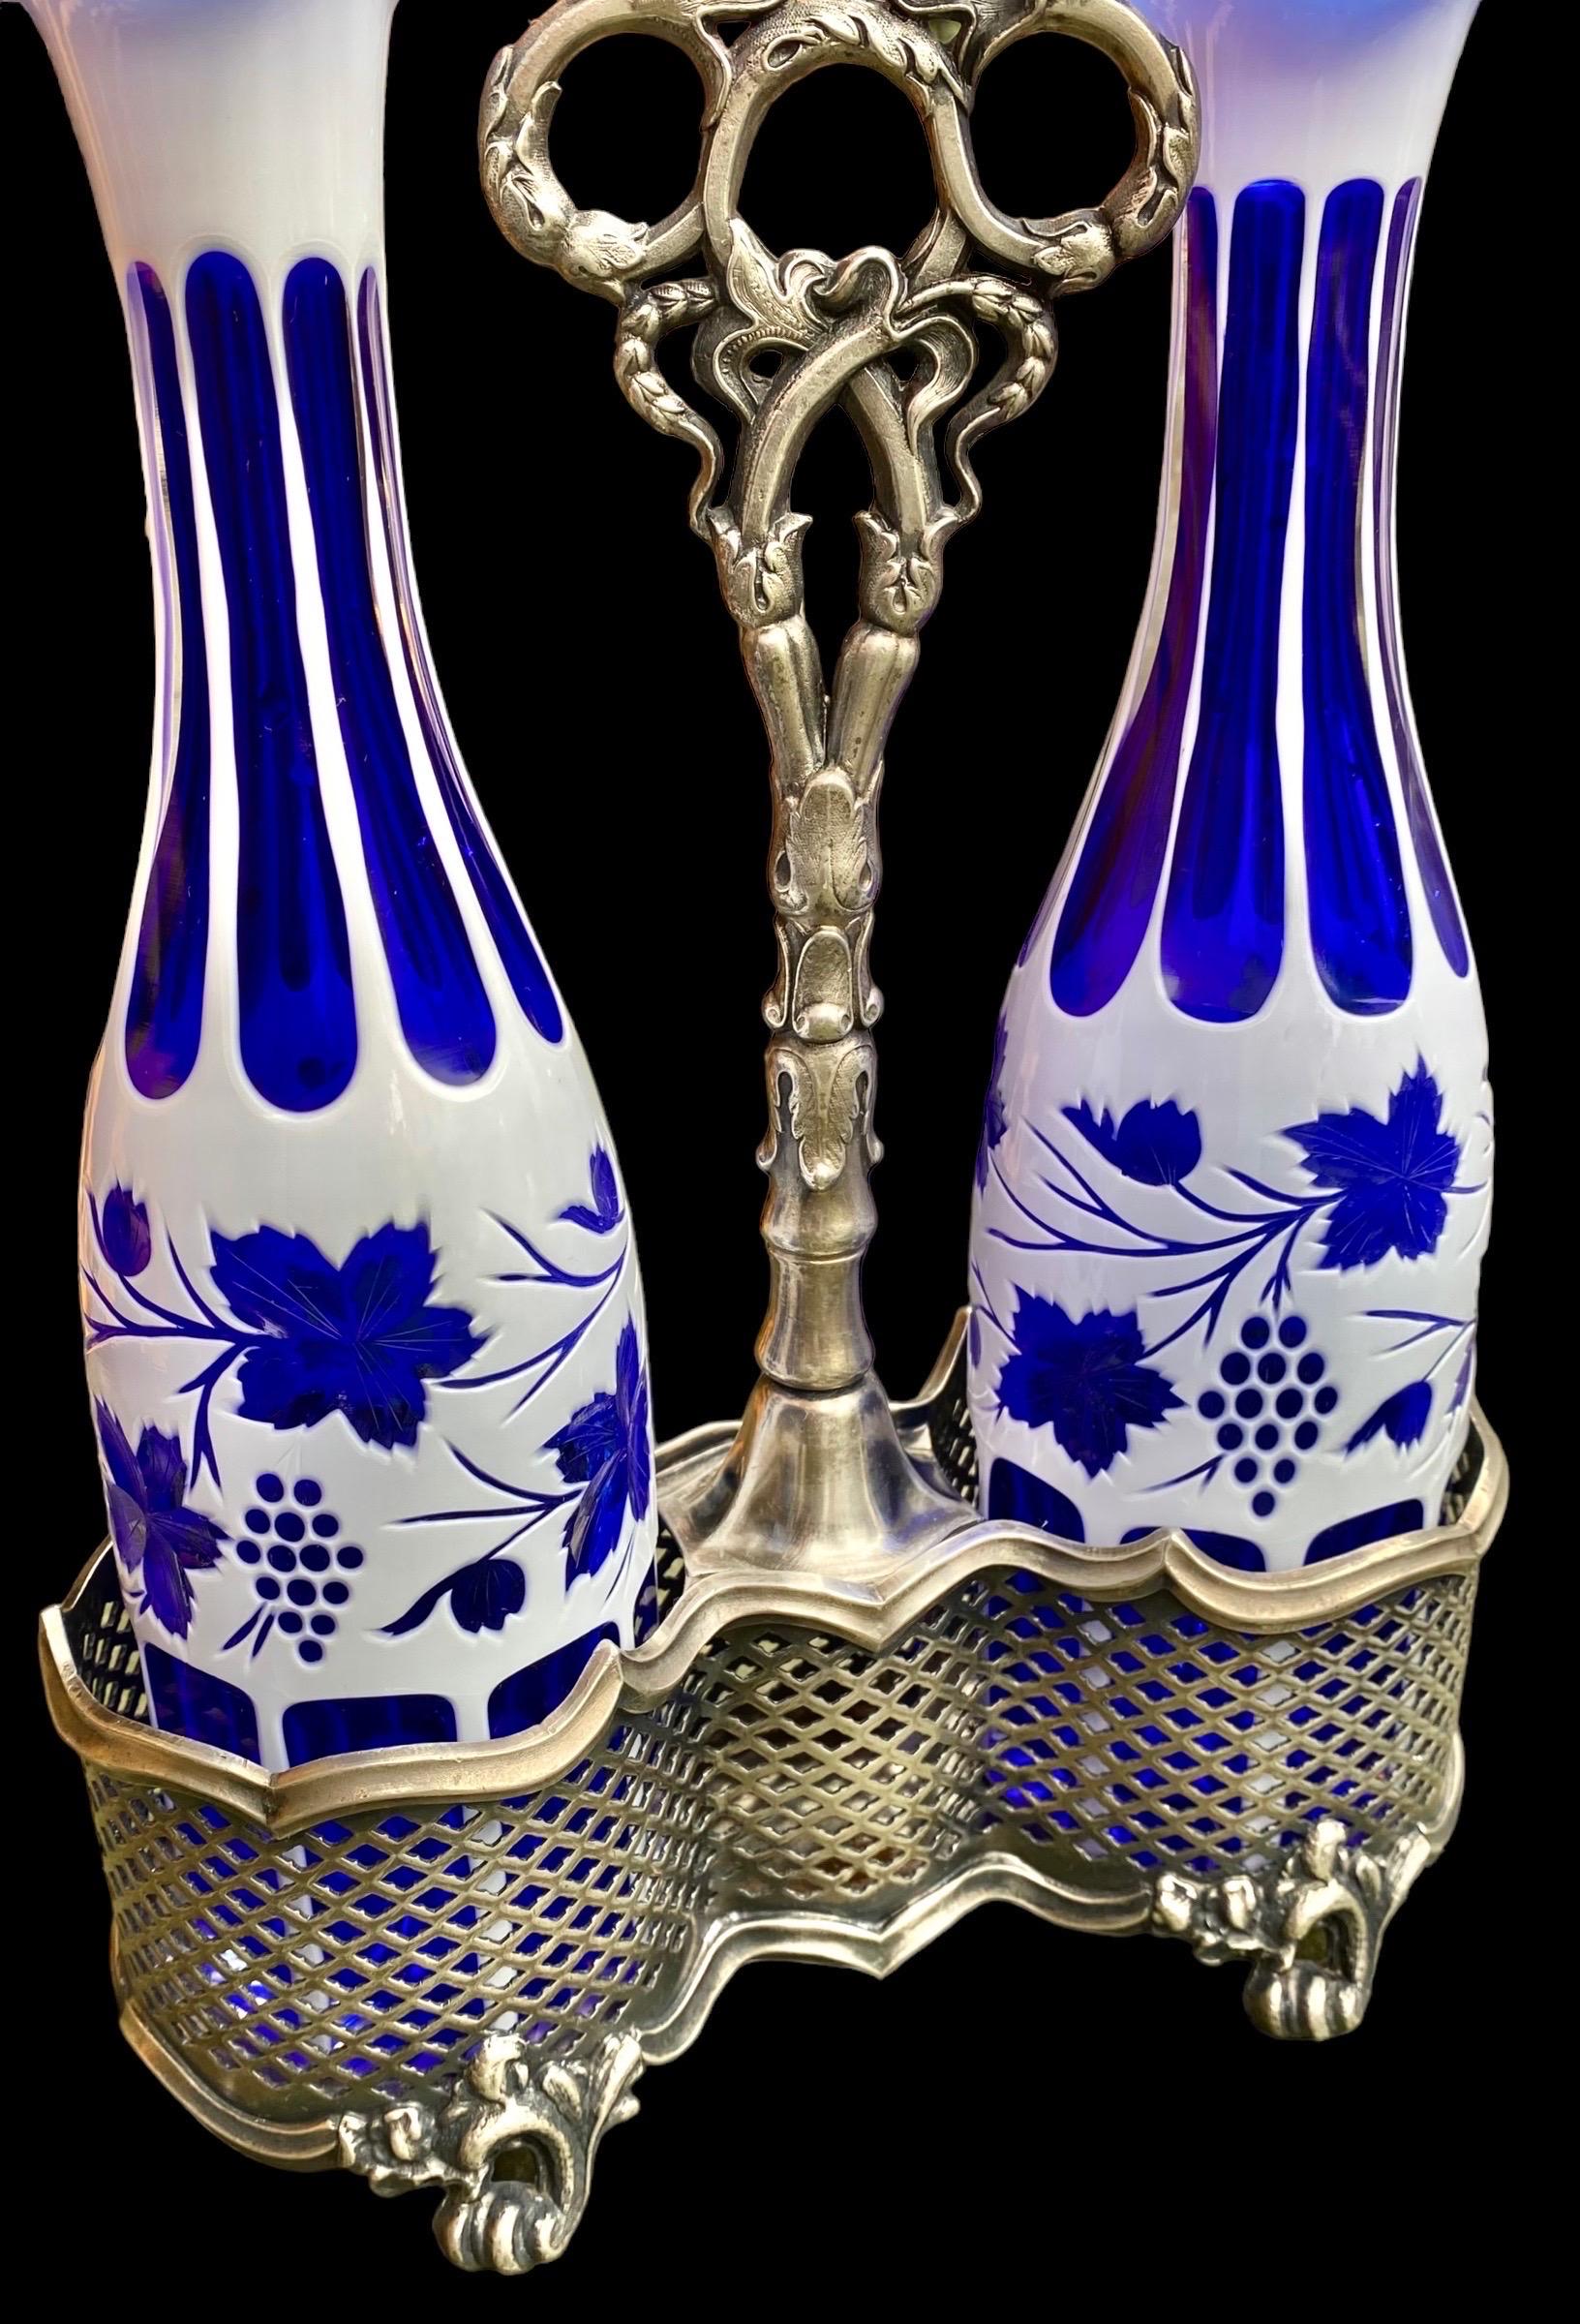 A fine pair of Bohemian glass white over cobalt blue decanters, late 19th century, decorated with cut panels and grapes, set with matching stoppers in a lovely Britannia pierced metal holder with a pierced flower-molded handle and stem.
A delight